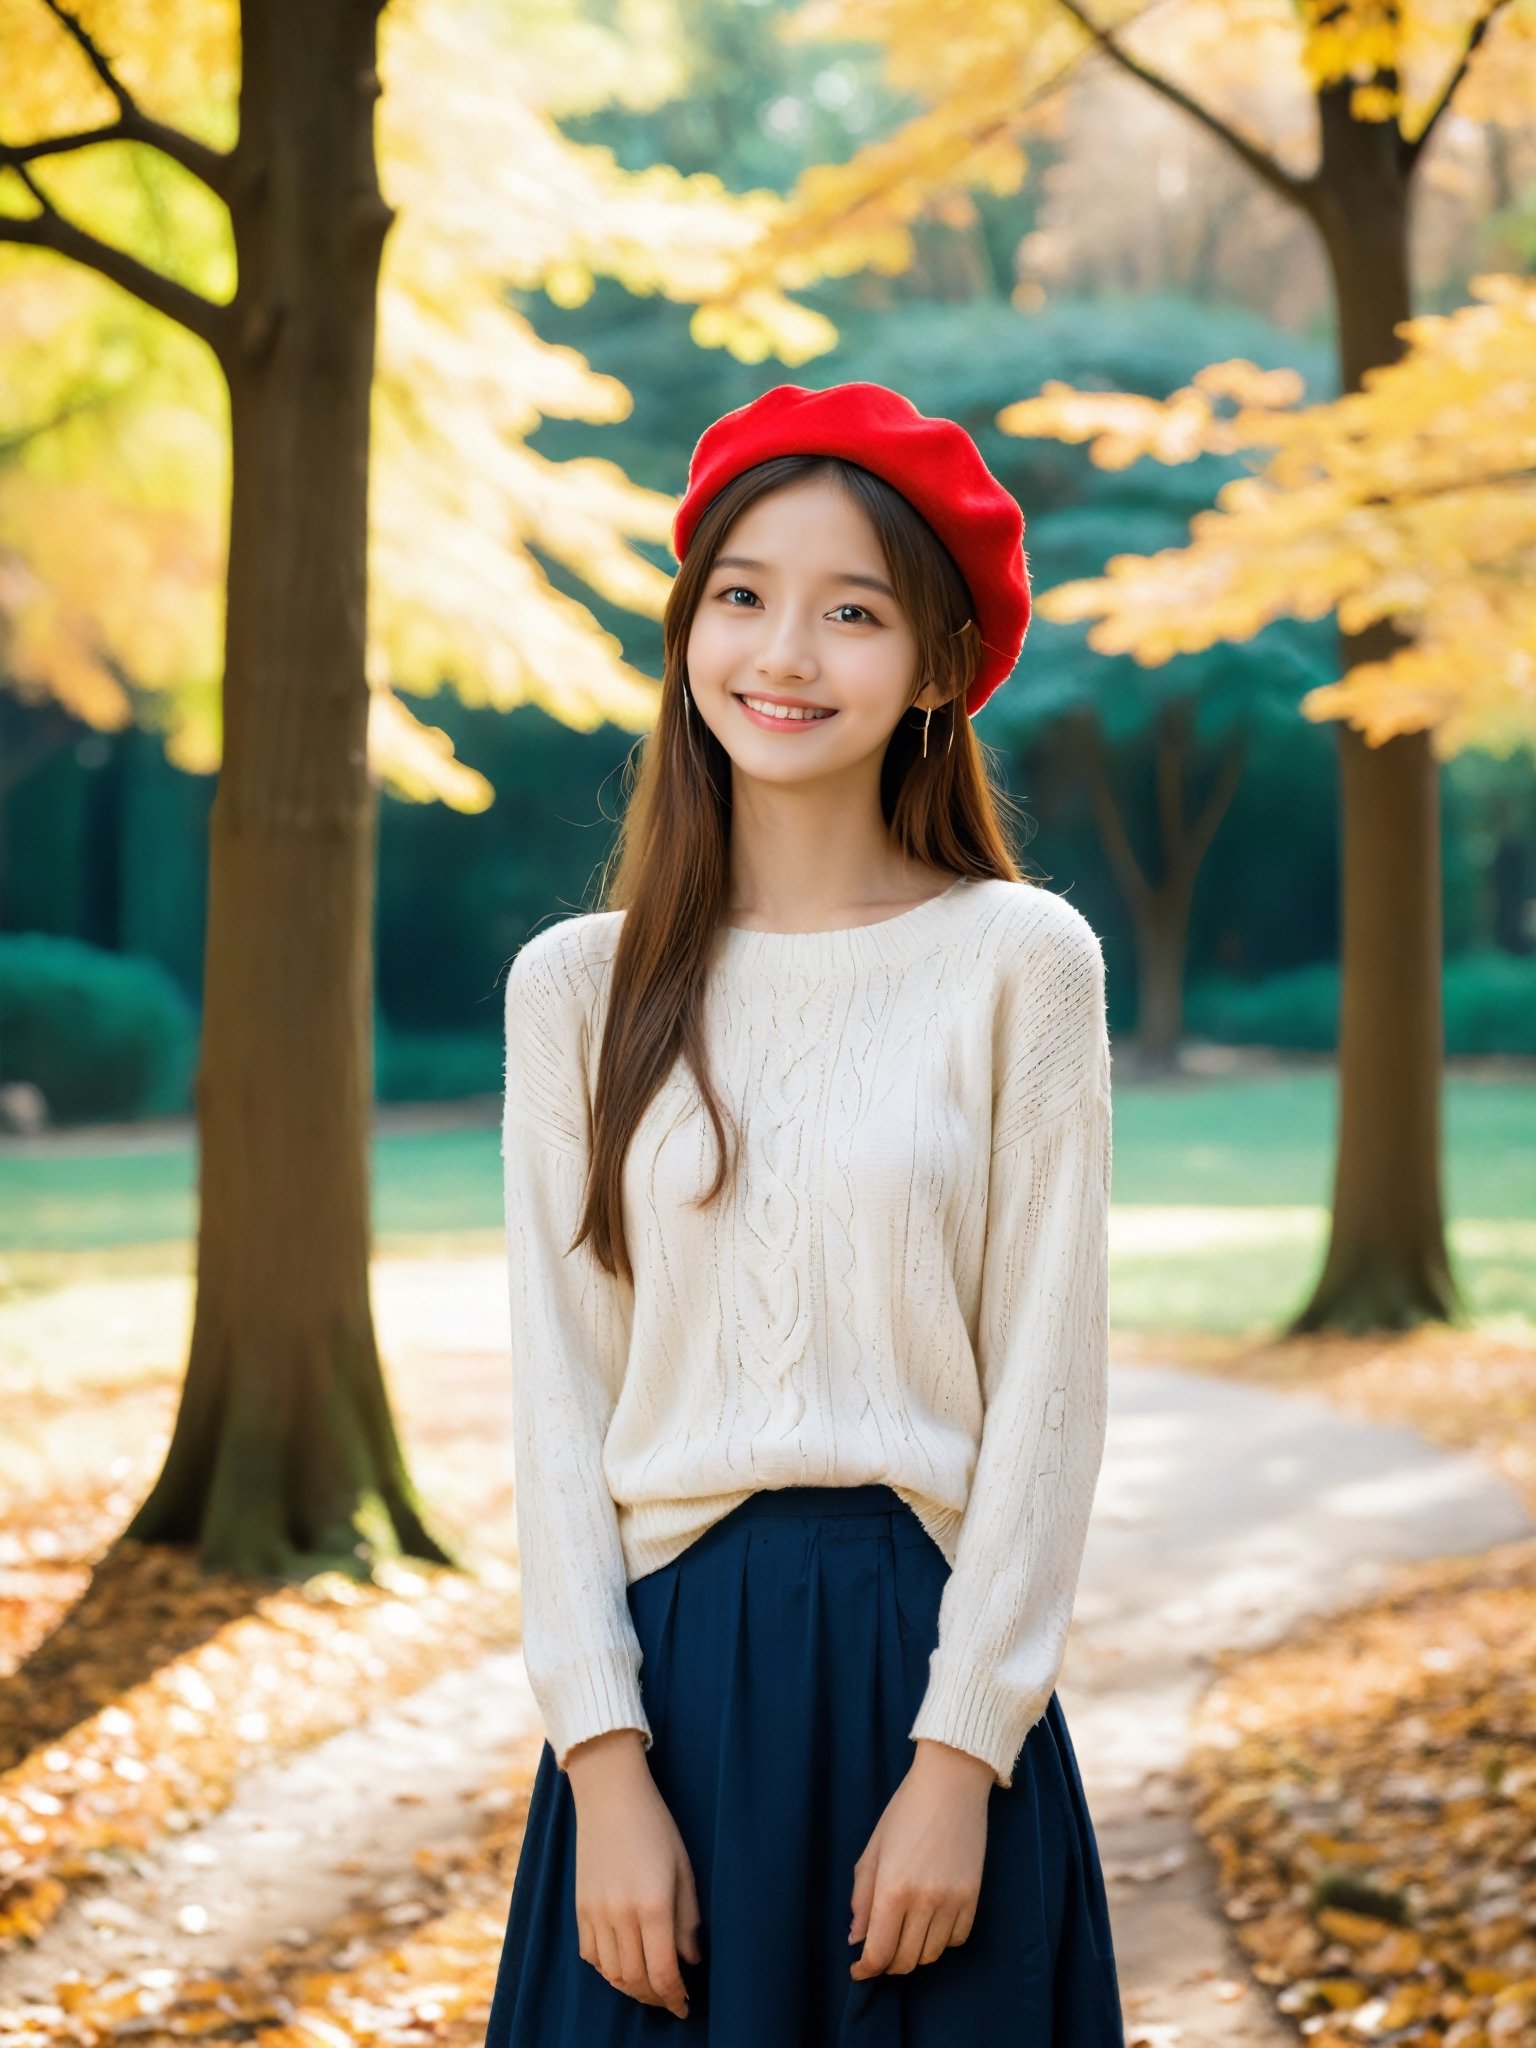 Imagine a young girl, aged between 14 and 17, with long flowing hair cascading down her back. She has a bright and infectious smile on her face, radiating warmth and joy. The girl is slender with a skinny body and very thin frame, but she carries herself with confidence and grace. 

She is standing alone in a deserted park, surrounded by nature's tranquility. The park is located outdoors, with lush greenery and towering trees providing a serene backdrop. The girl is dressed in a cozy white sweater that hugs her slim figure, complemented by a vibrant red fur-beret perched on top of her head. She accessorizes with delicate ear rings that catch the sunlight and sparkle with every movement.

The atmosphere in the park is calm and peaceful, with a gentle breeze rustling the leaves and birds chirping in the distance. The girl seems to be lost in her own thoughts, enjoying the solitude and the beauty of the surroundings. Despite being alone, she exudes a sense of contentment and inner peace, as if she has found a sanctuary in this deserted park.

This scene captures the essence of a young girl's innocence and resilience, as she navigates the complexities of adolescence with a smile on her face and a hopeful heart. The combination of her youthful appearance, the serene outdoor setting, and her stylish yet understated outfit creates a visually captivating image that evokes a sense of tranquility and wonder.
